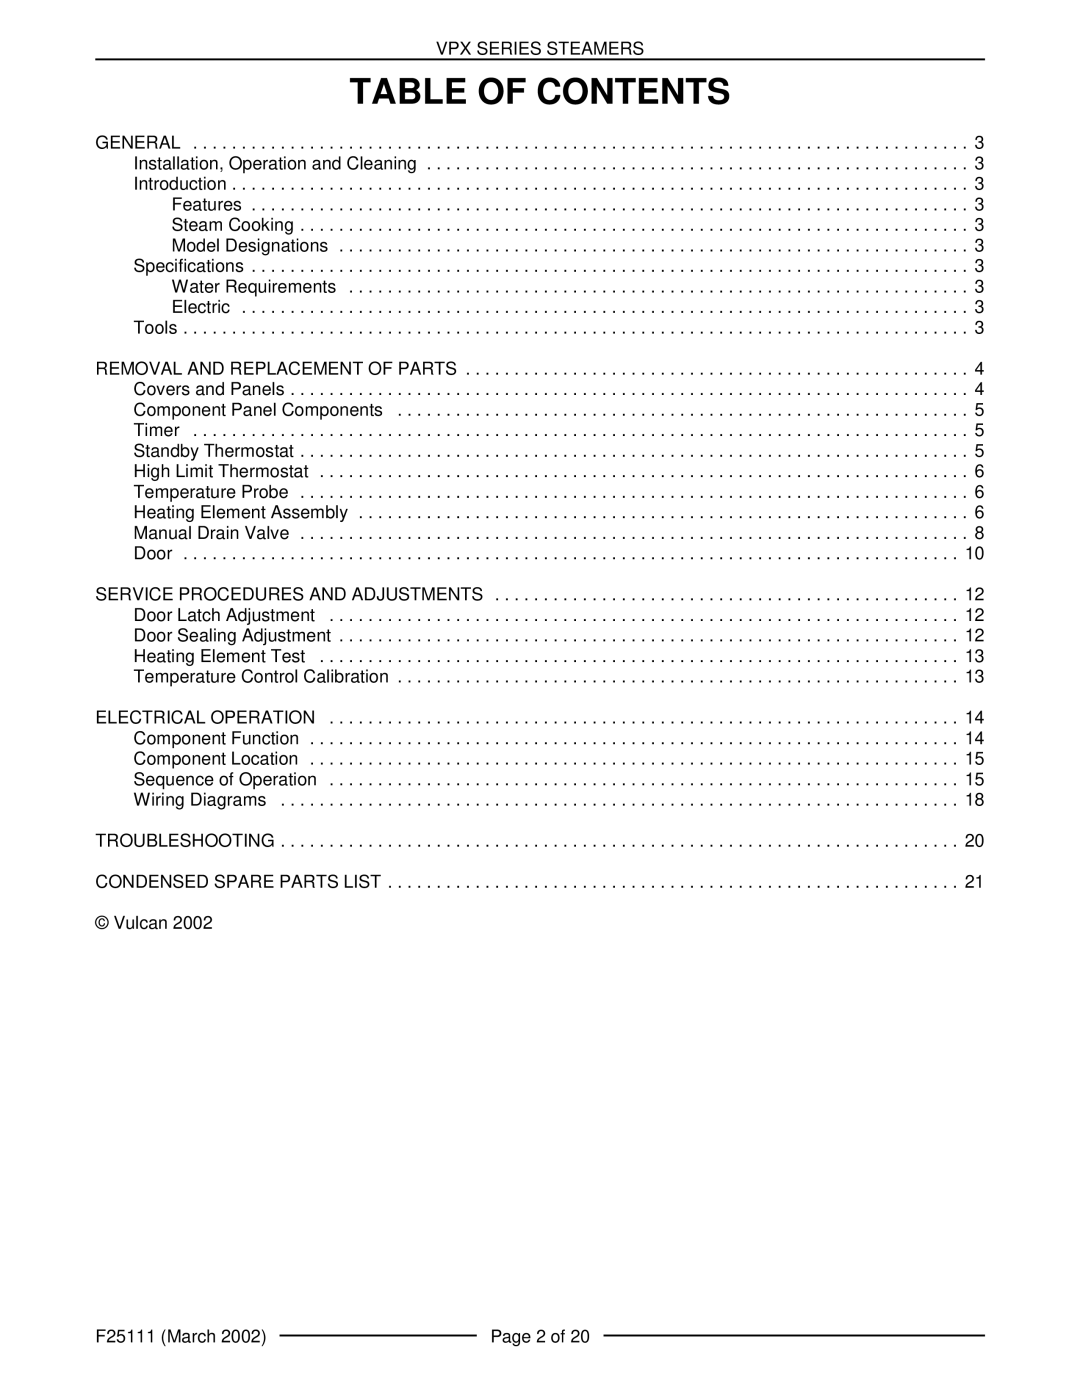 Vulcan-Hart VPX3 126586, VPX5 126588 manual Table Of Contents 